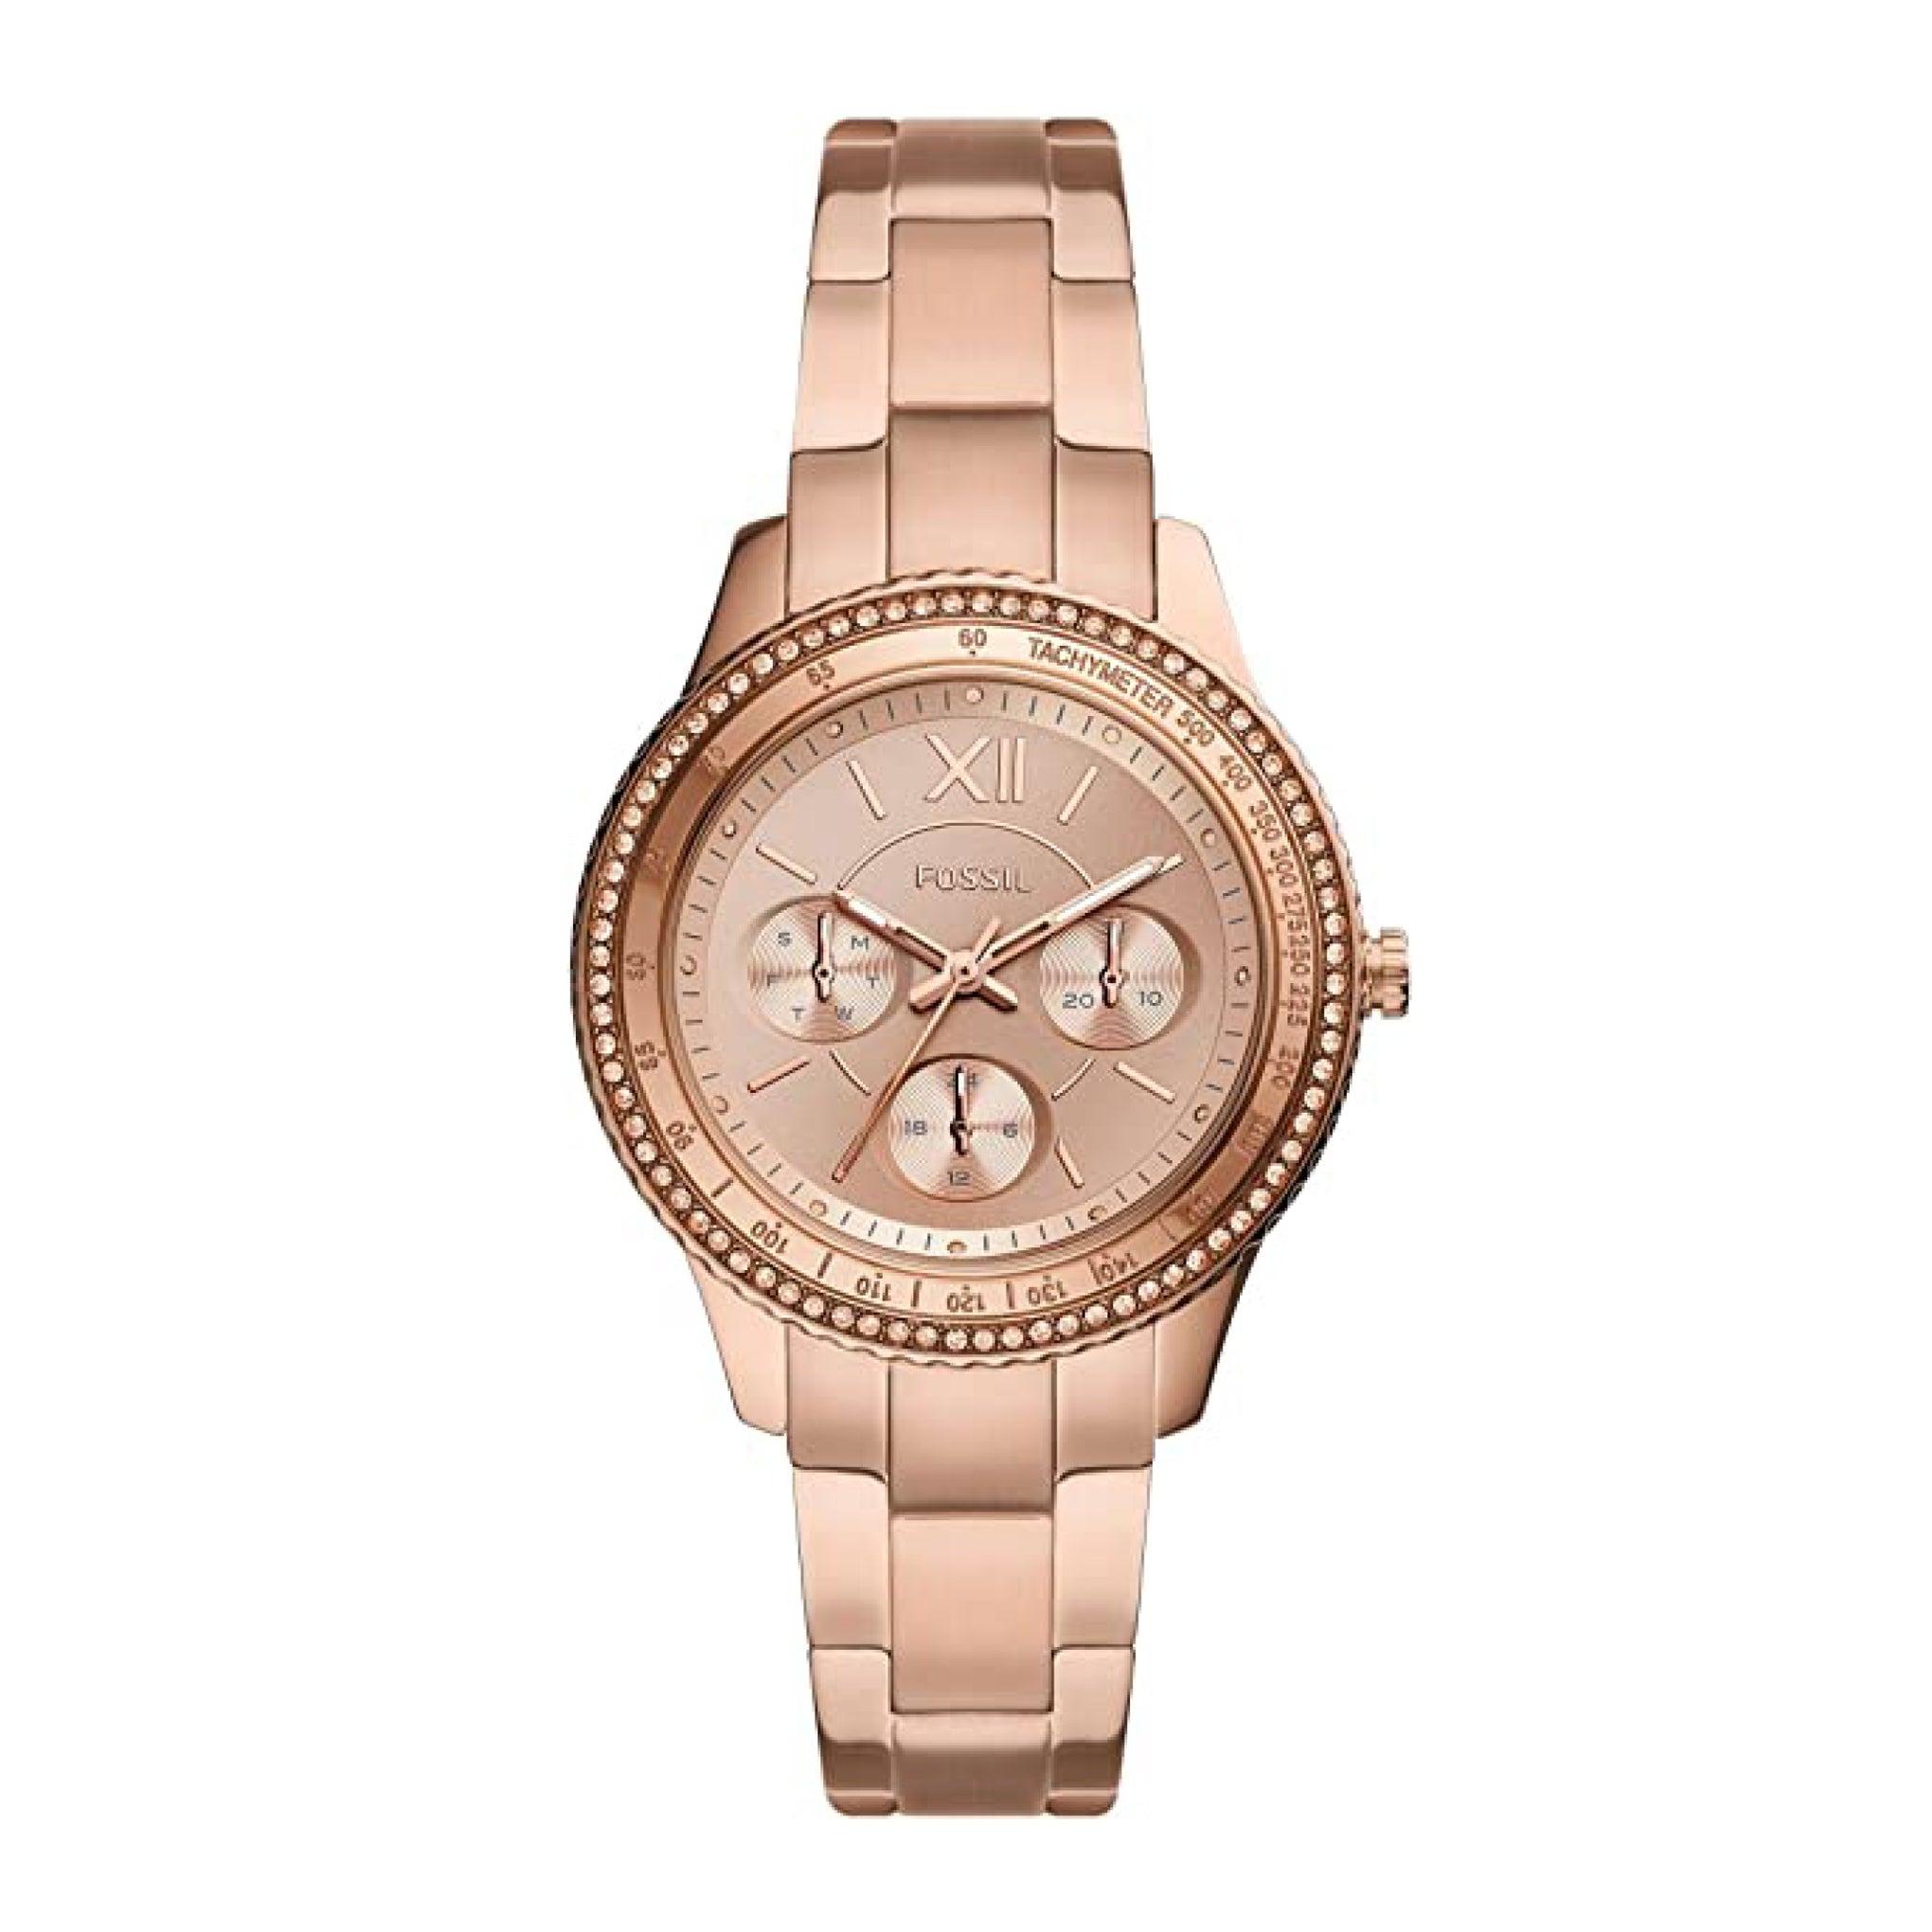 Fossil Es5106 Stella Sport Multifunction Rose Gold-Tone Stainless Steel Watch